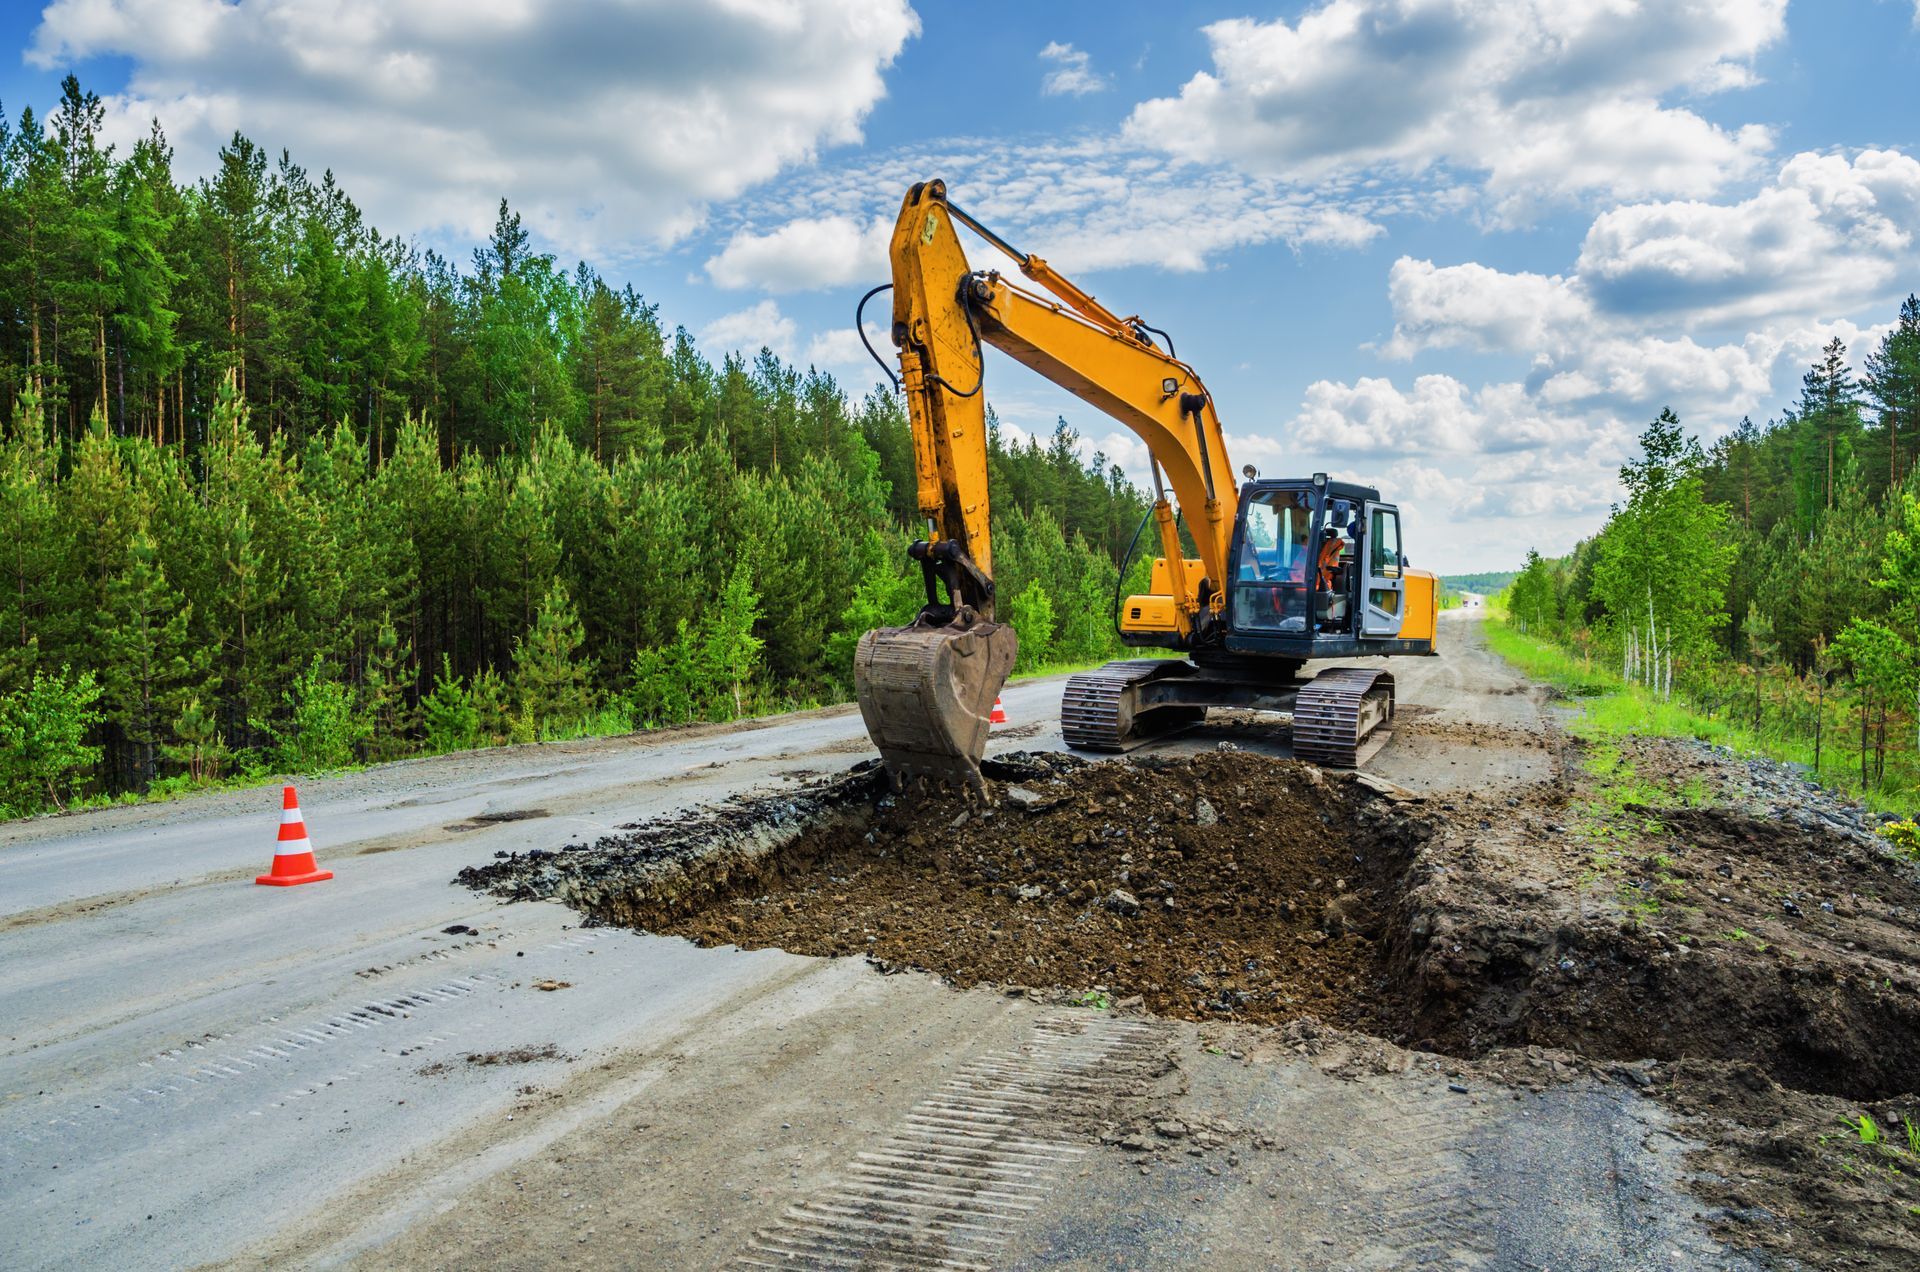 Destruction of the road surface on an intercity highway using an excavator to replace it